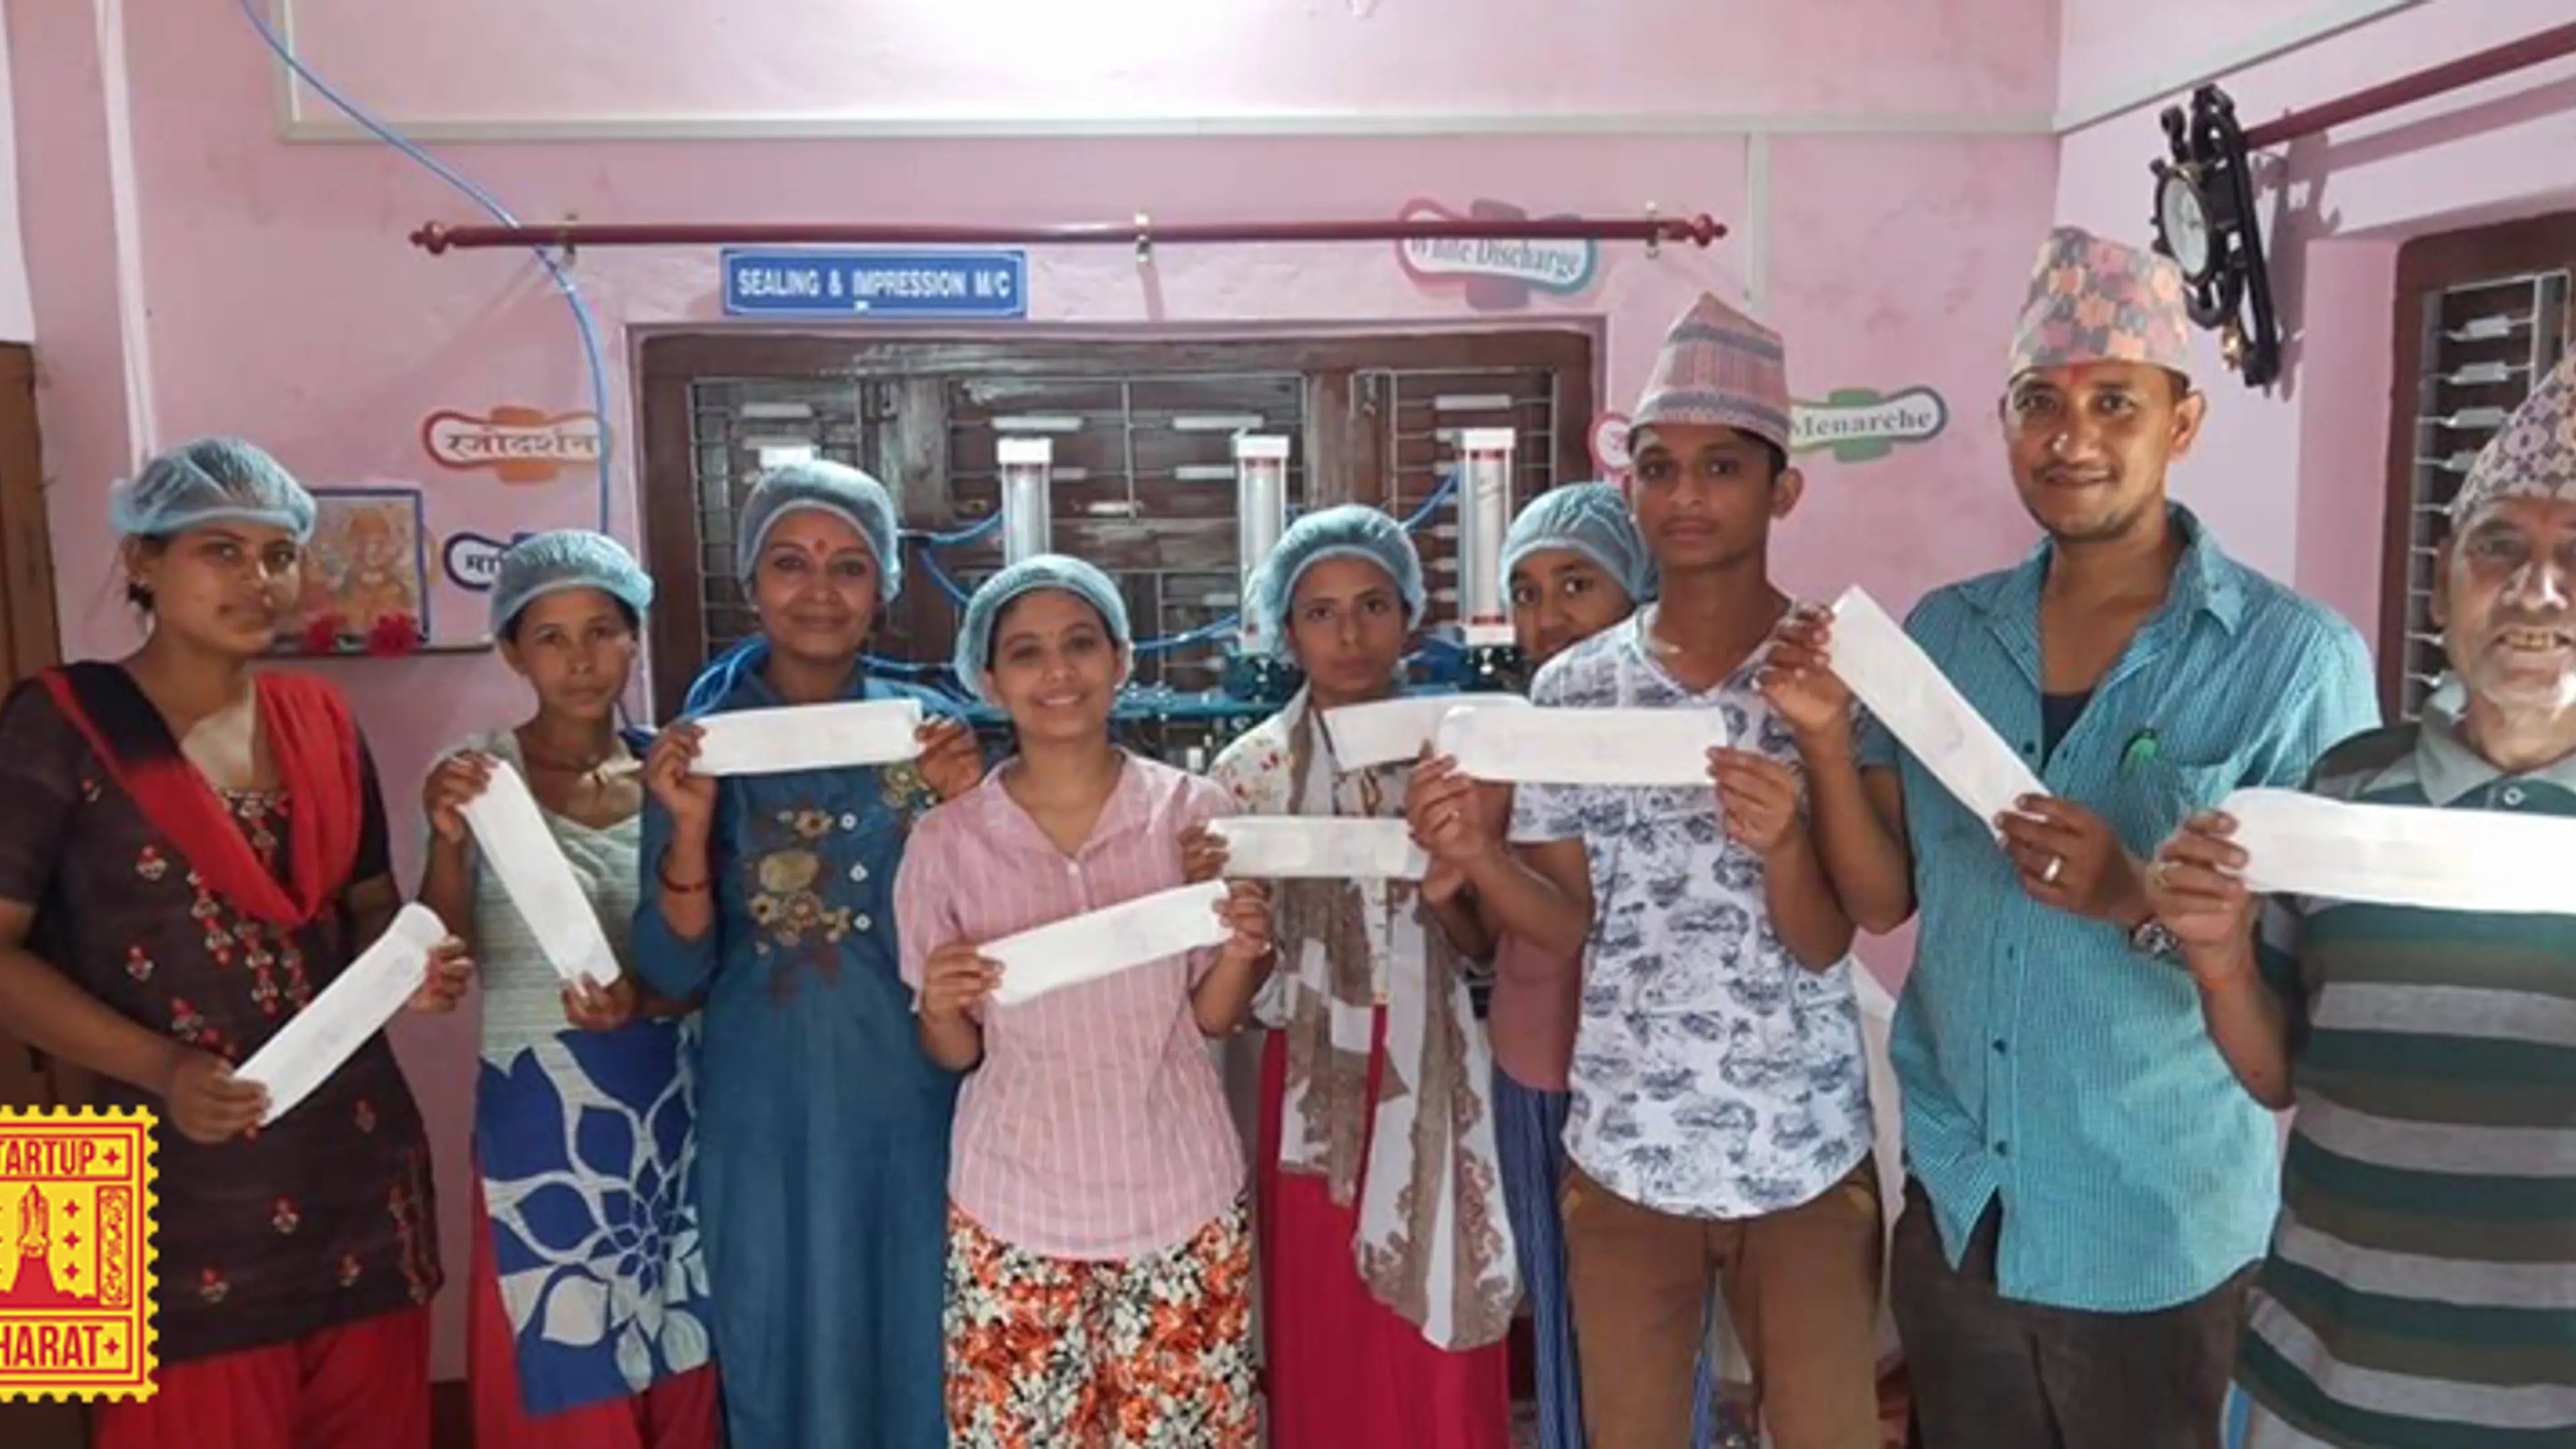 [Startup Bharat] Bhopal-based Rag Innovations is taking low-cost sanitary pads to women in villages, jails across India